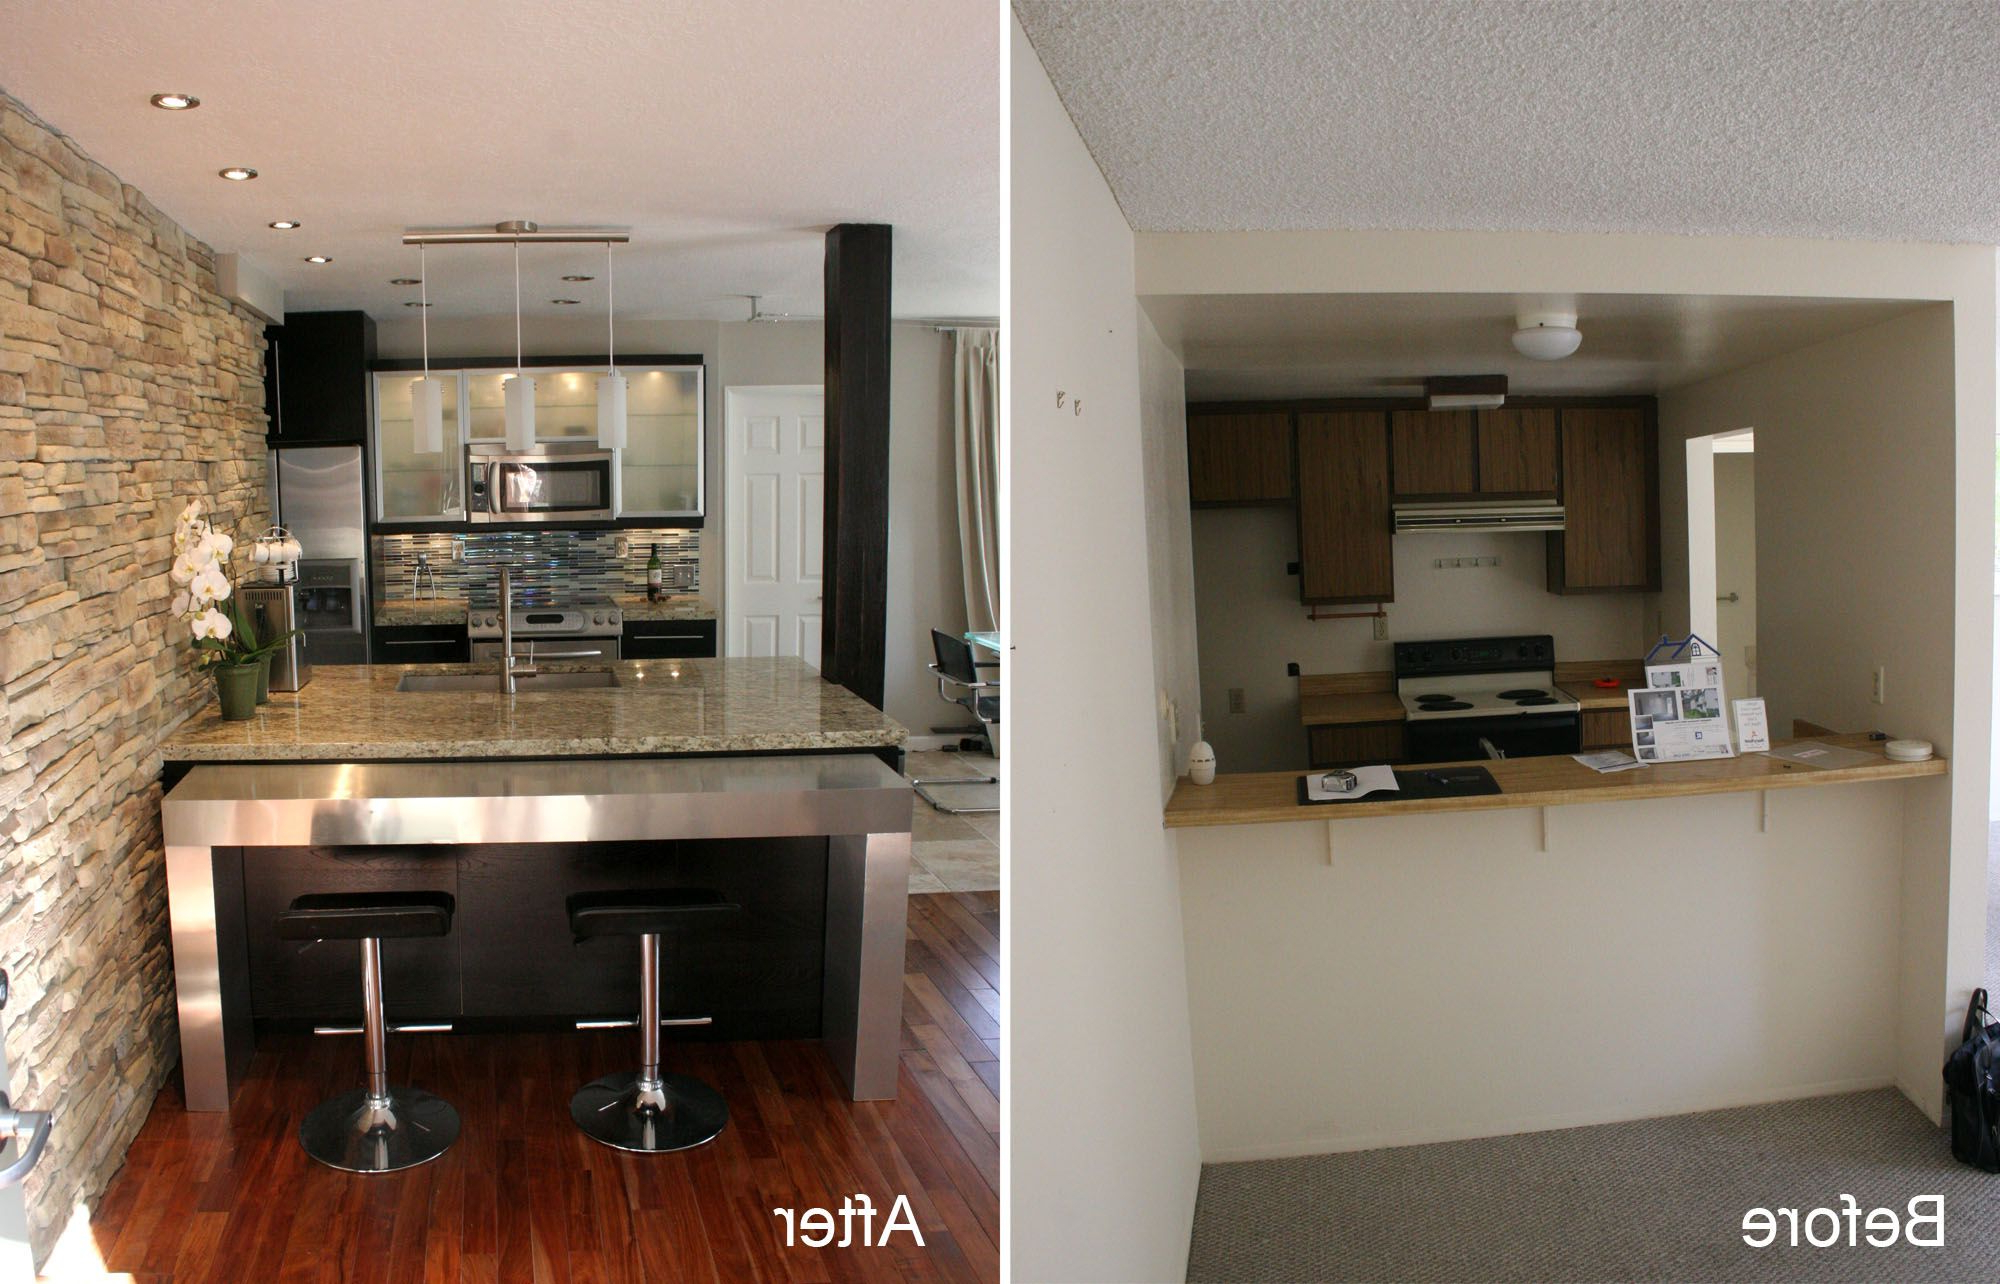 Kitchen Remodels Before And After Kitchen Planning And